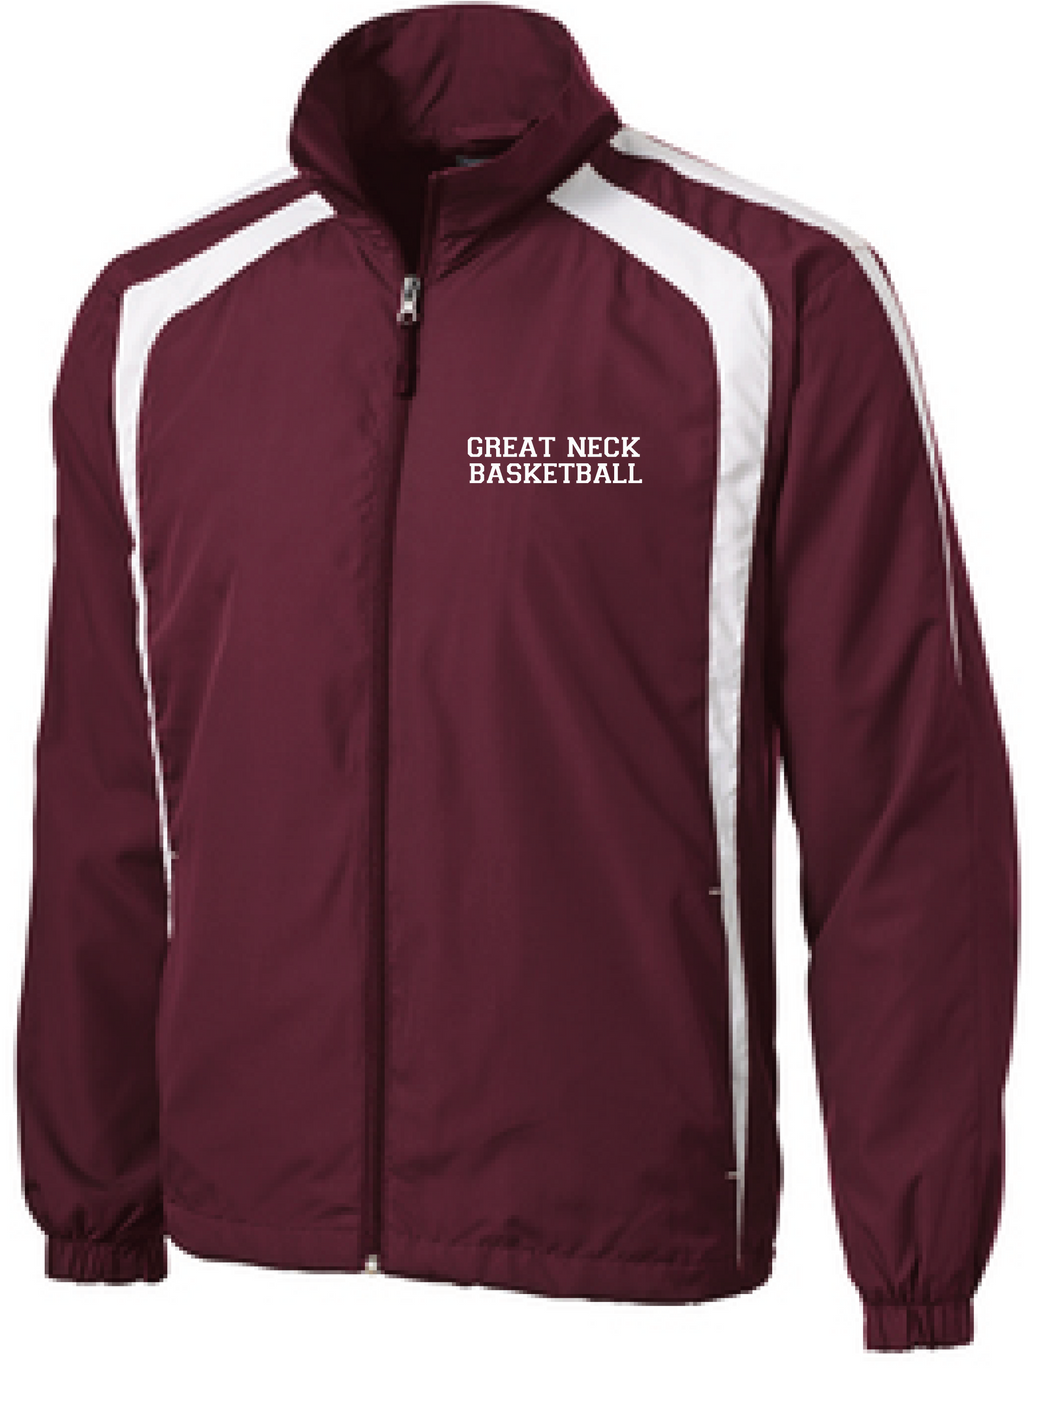 Tricot Warm Up Jacket  (Youth & Adult) / Maroon & White / Great Neck Basketball